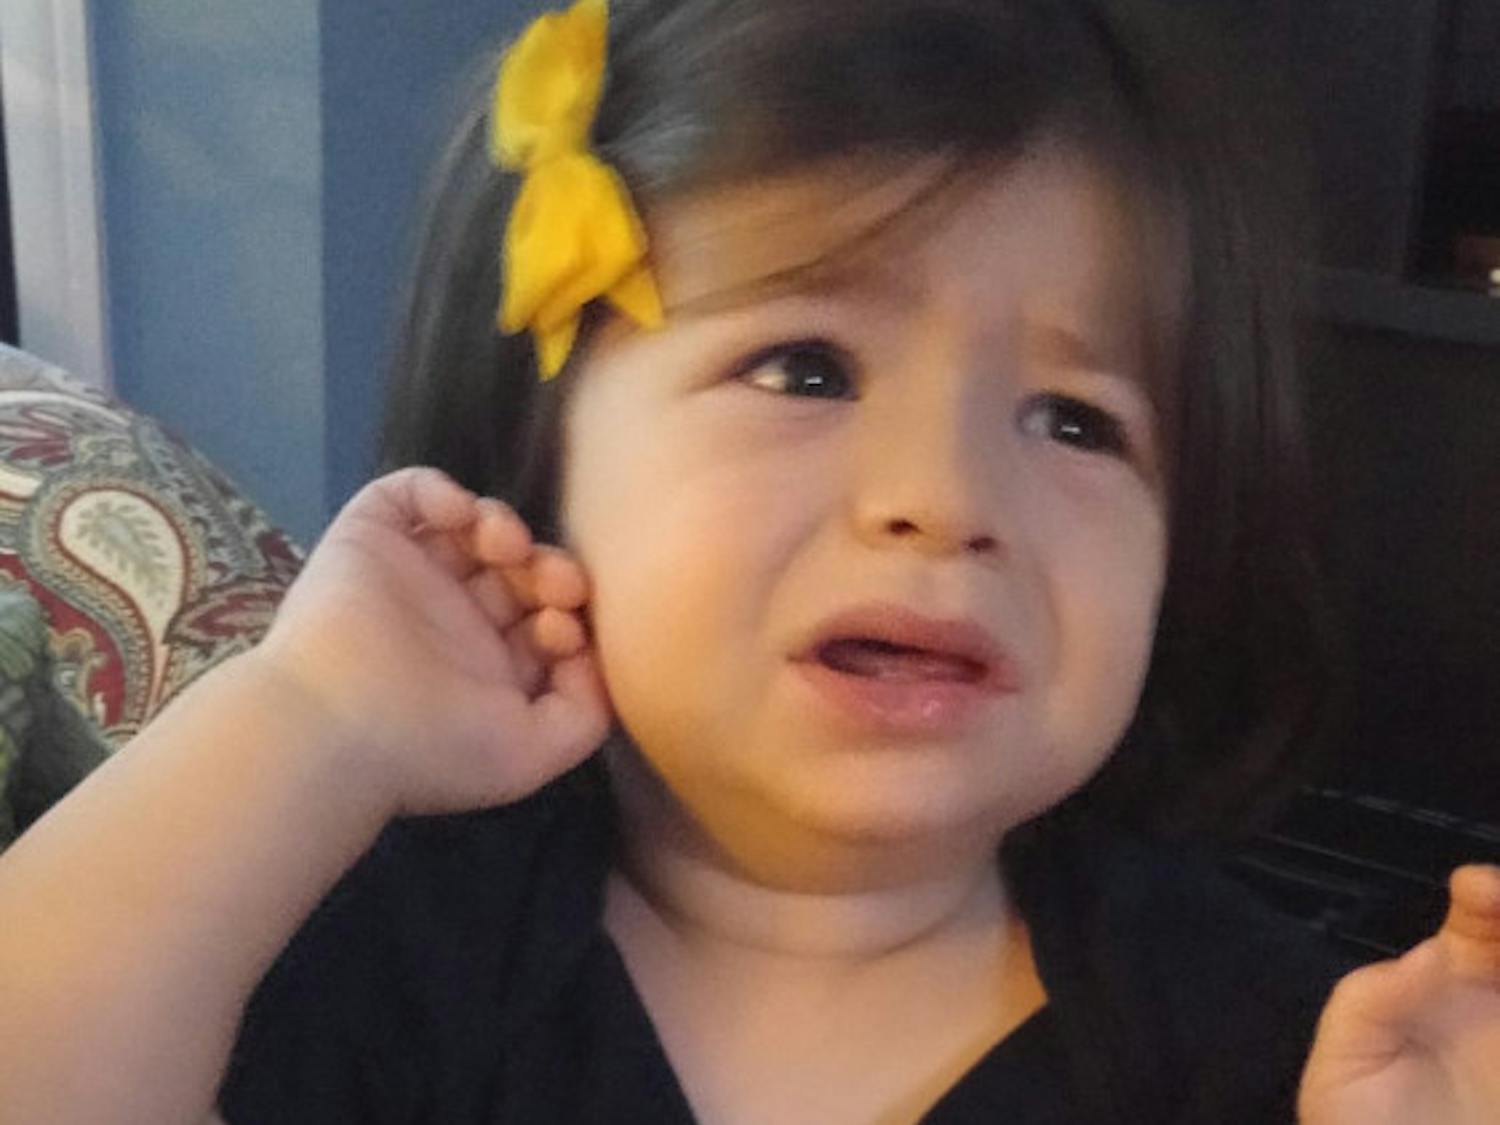 Lily, the daughter of tormented Gator fan Daniel Stone, offers an uncomfortable expression while wearing Michigan apparel.